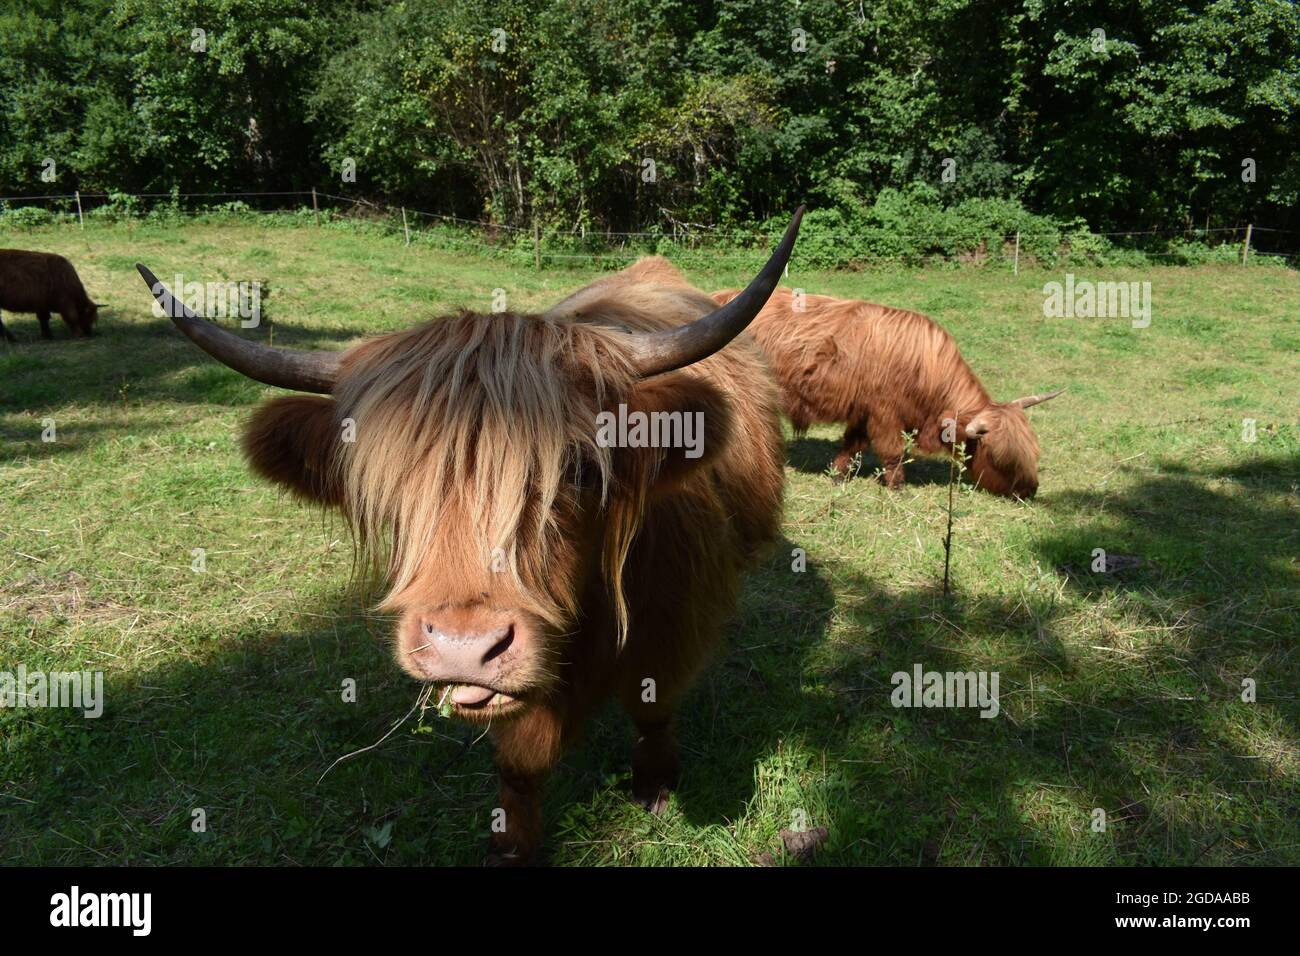 Highland cow in Germany Stock Photo